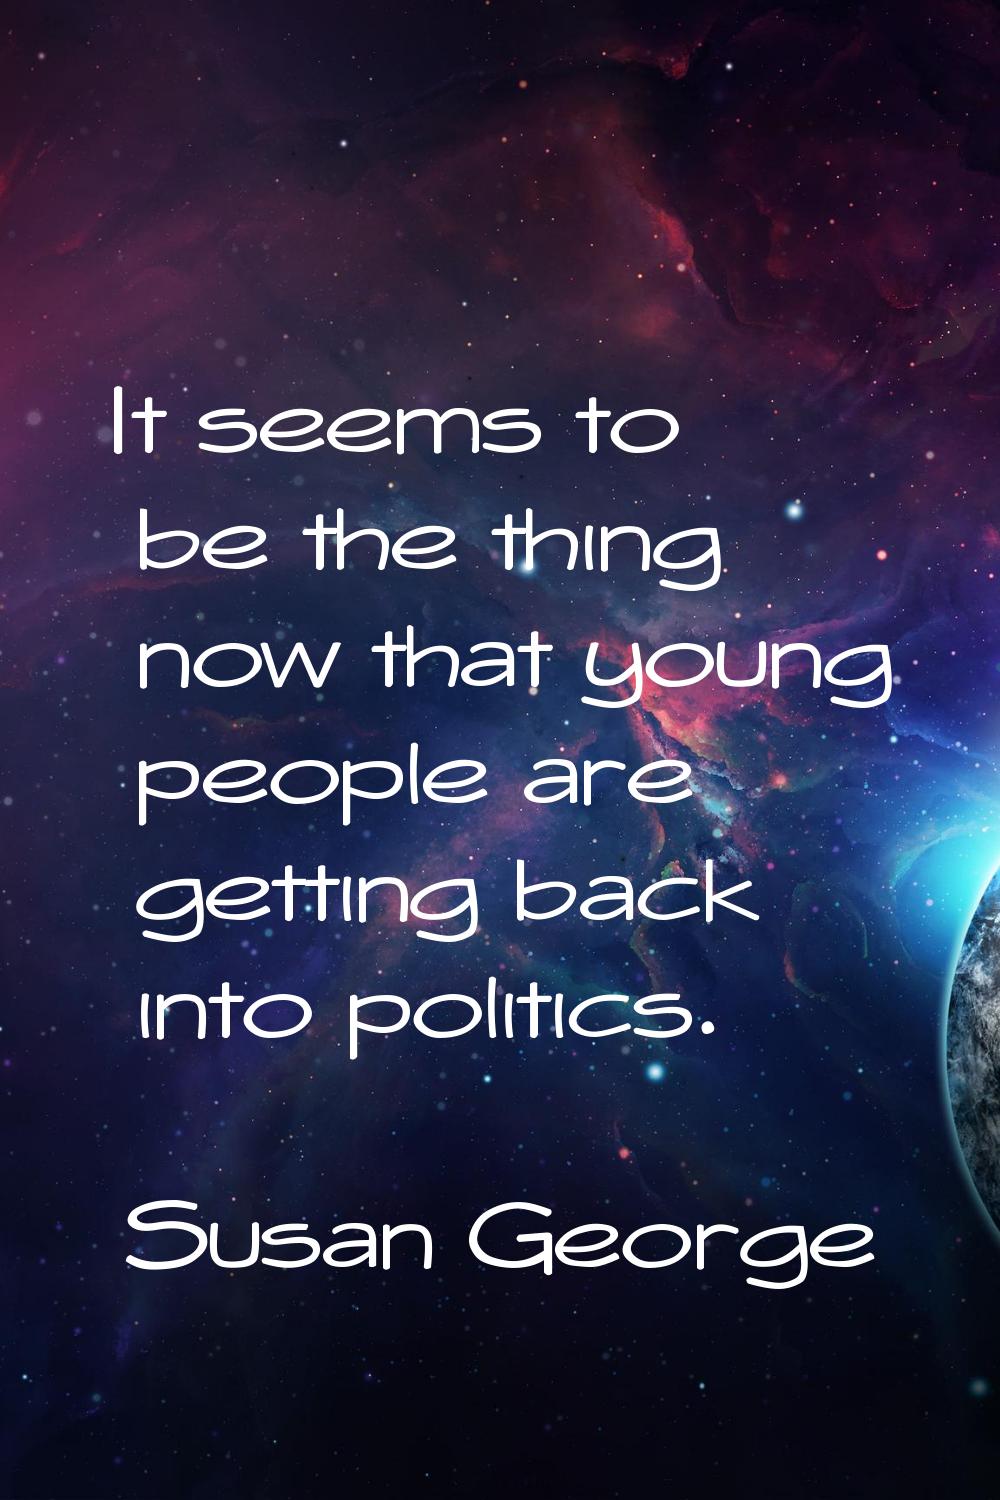 It seems to be the thing now that young people are getting back into politics.